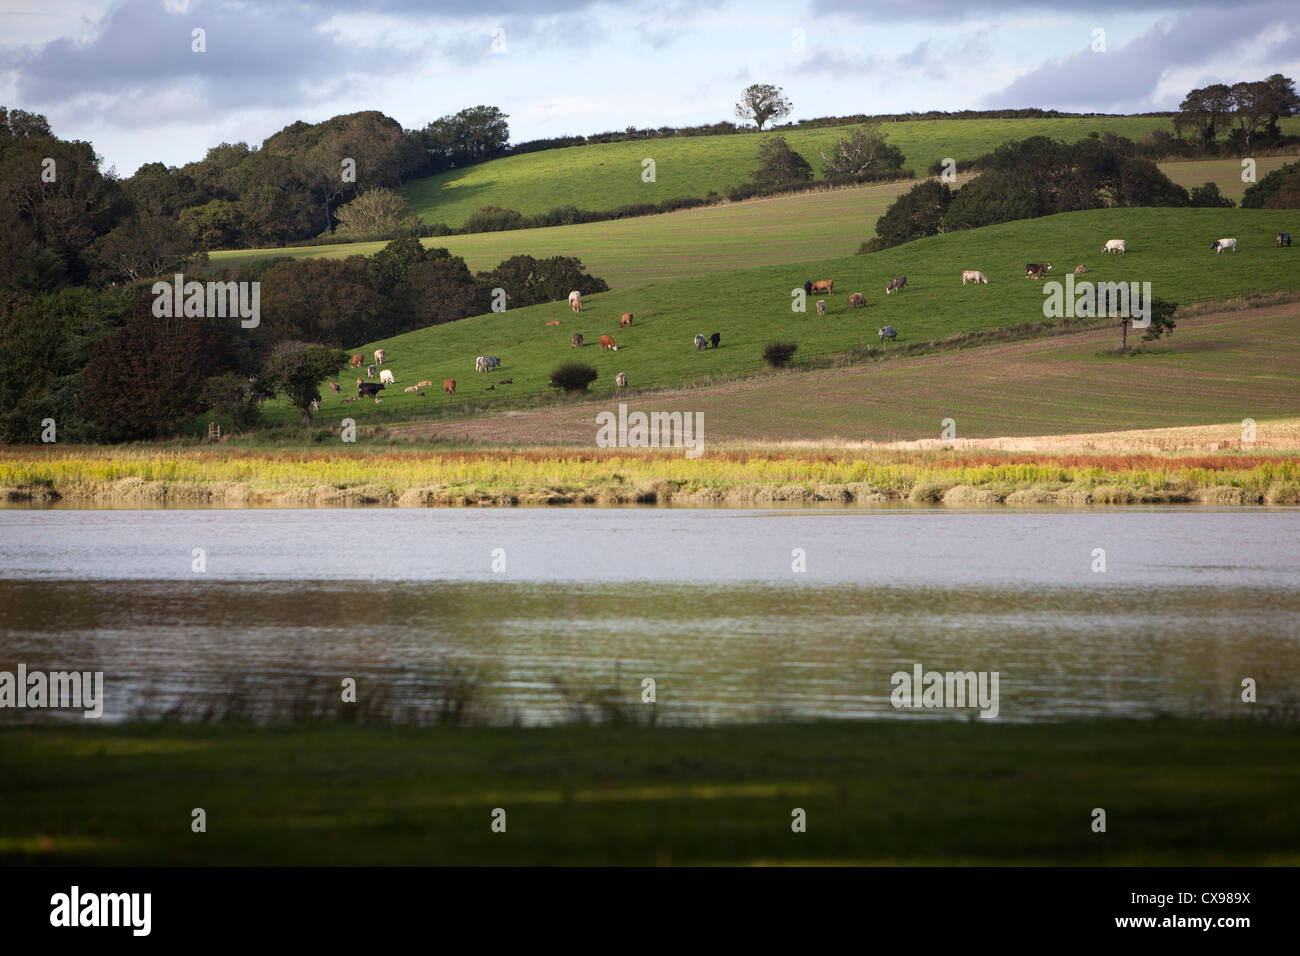 The River Tiddy flows past a typical English country scene at St Germans, Cornwall Stock Photo